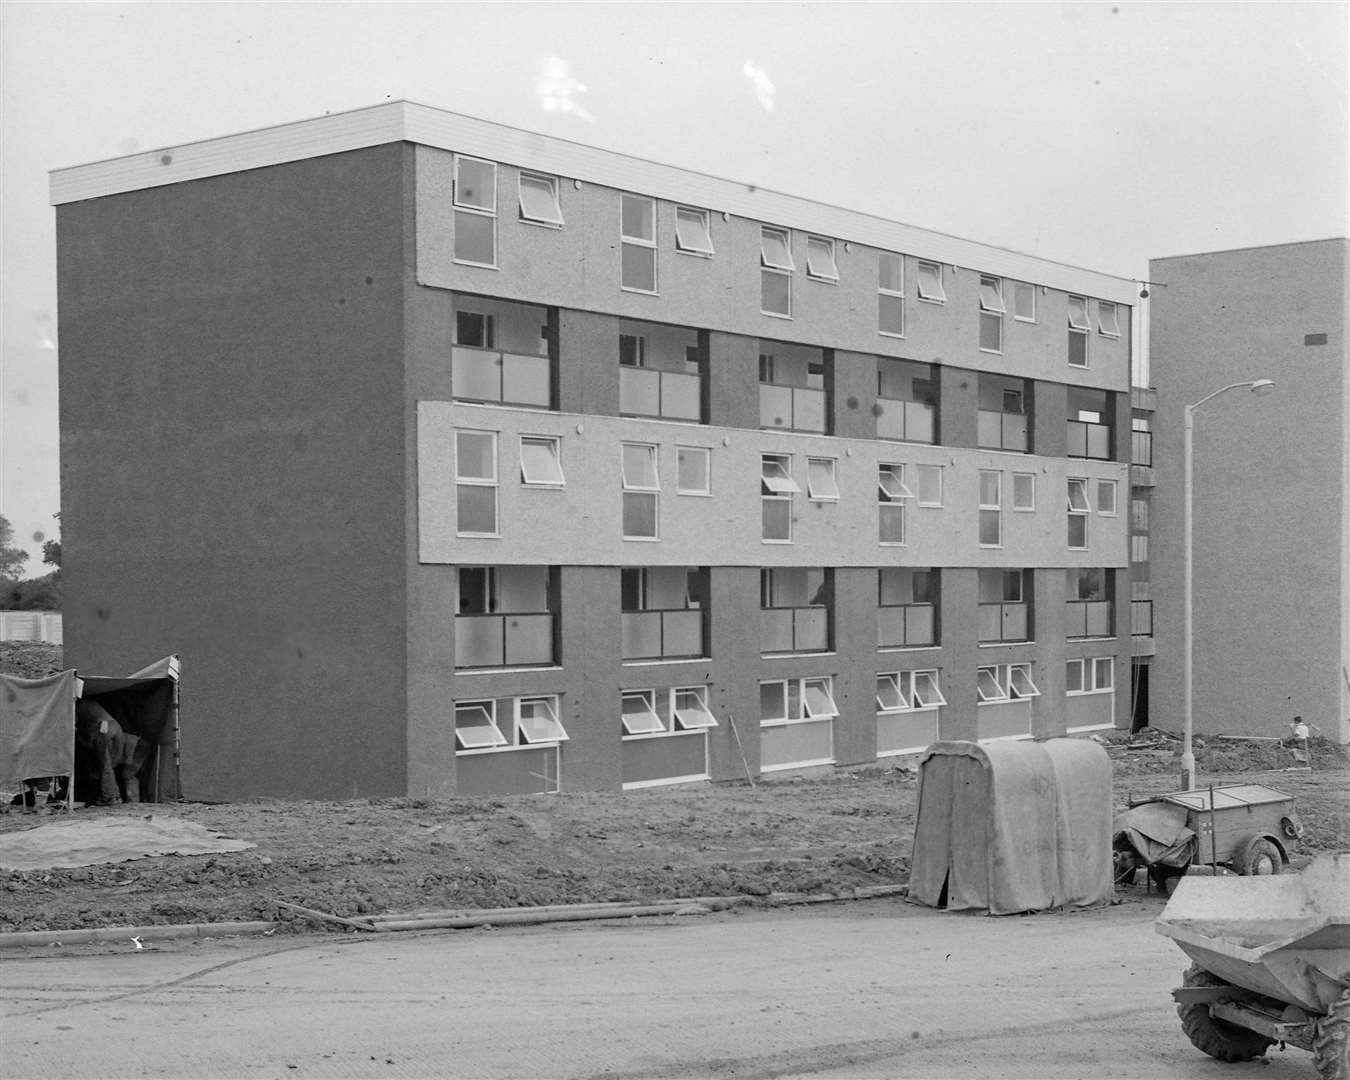 The blocks of flats were an imposing feature of the Stanhope estate before their demolition. Picture: Steve Salter